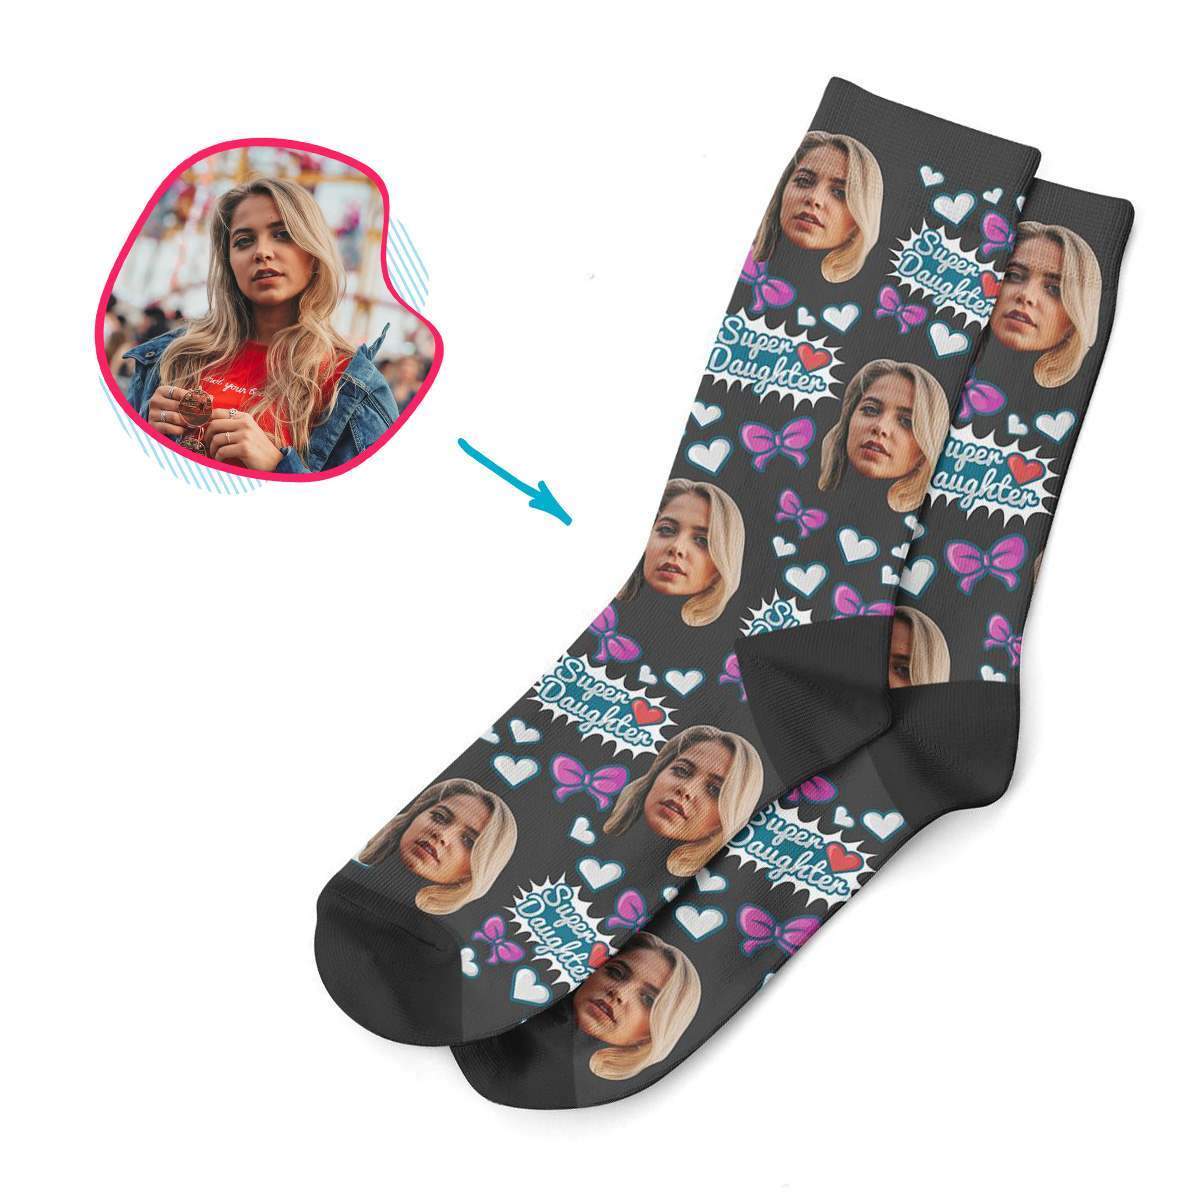 dark Super Daughter socks personalized with photo of face printed on them